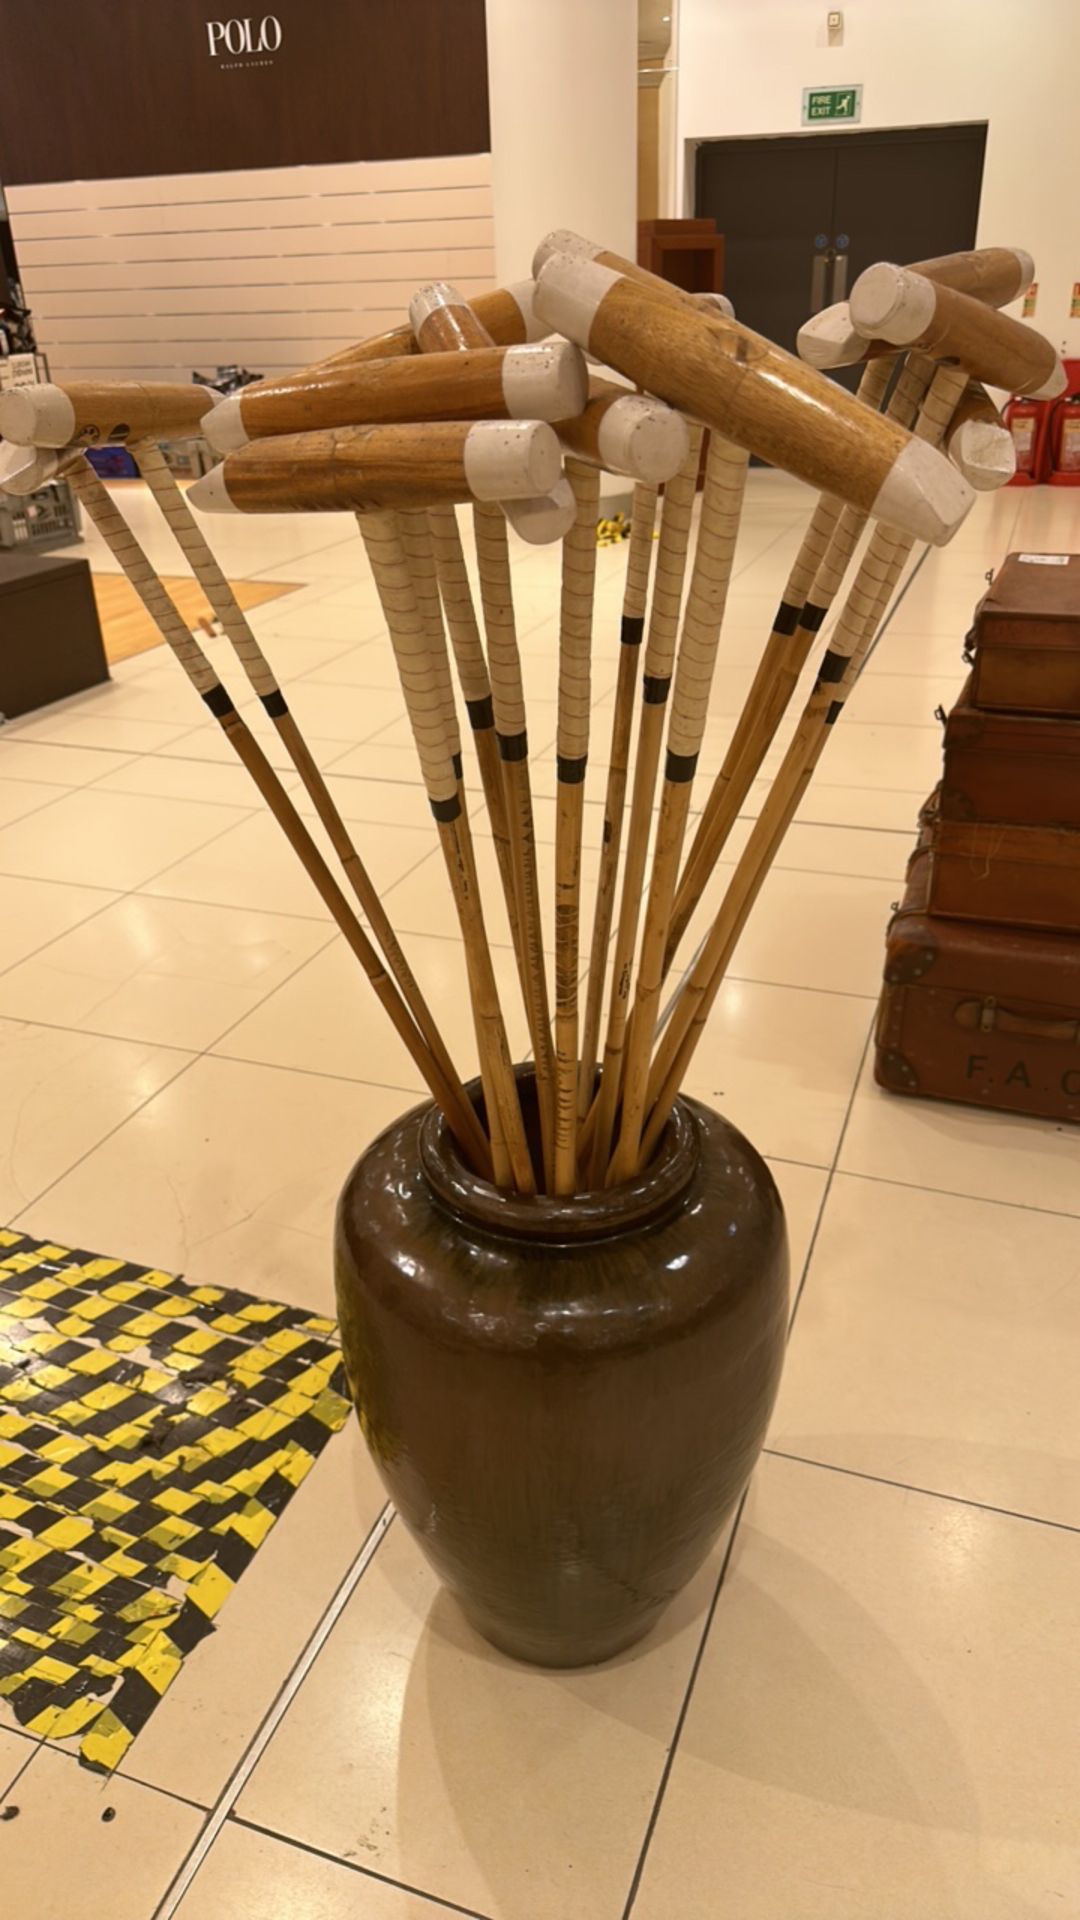 Polo Sticks With Large Ceramic Vases - Image 3 of 3